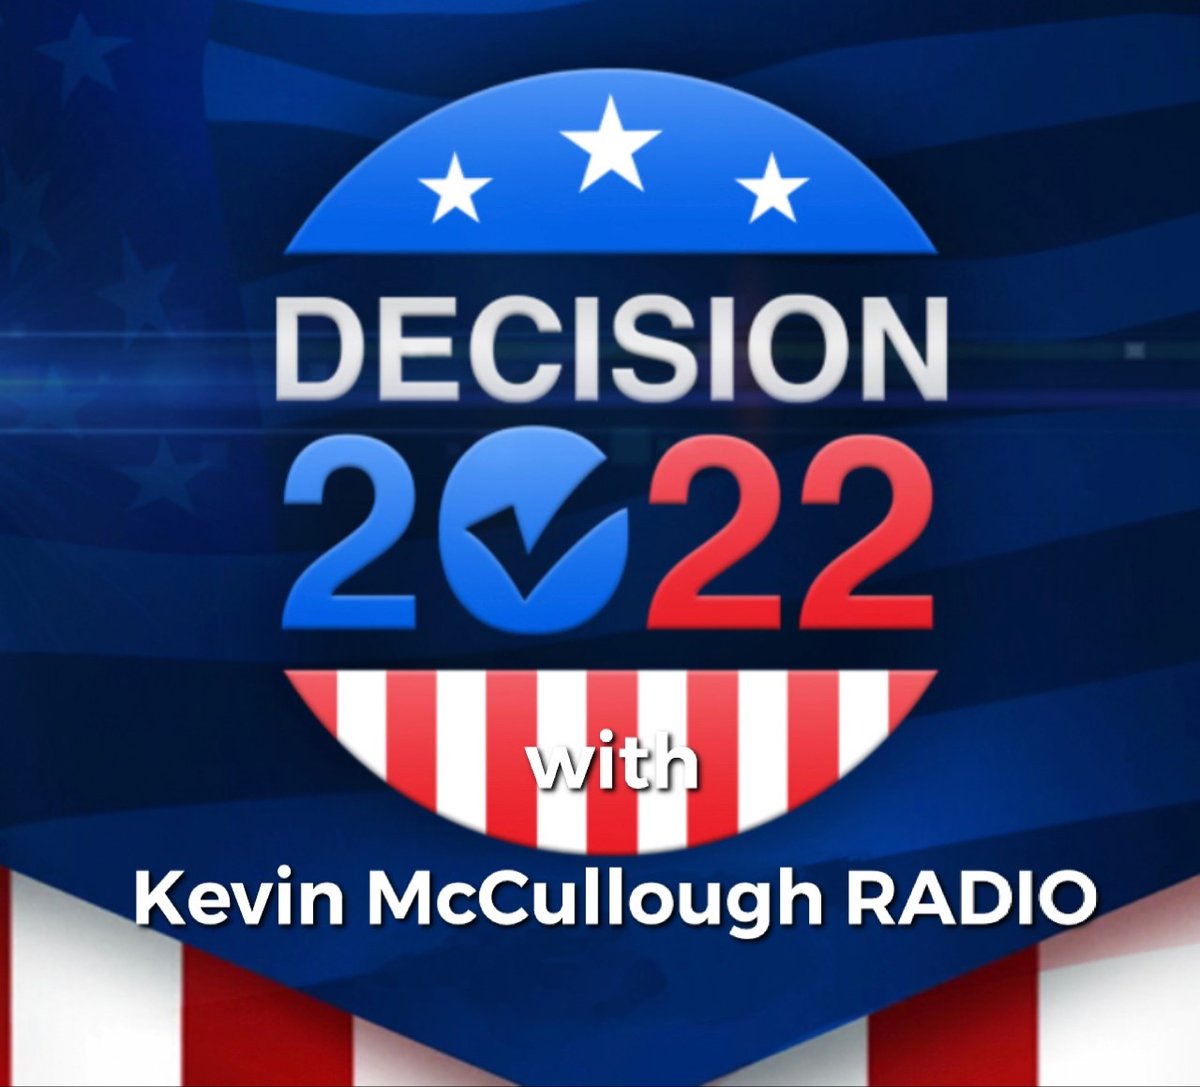 Special thanks to @leezeldin & @FrankPallottaNJ along w/ appearances by @KariLake , @PressSec , & @NickLangworthy for being apart of our special #Decision2022 coverage for @RadioNightLIVE If you live in a state where the polls are still open, Go Vote! soundcloud.com/kmcradio/20221…